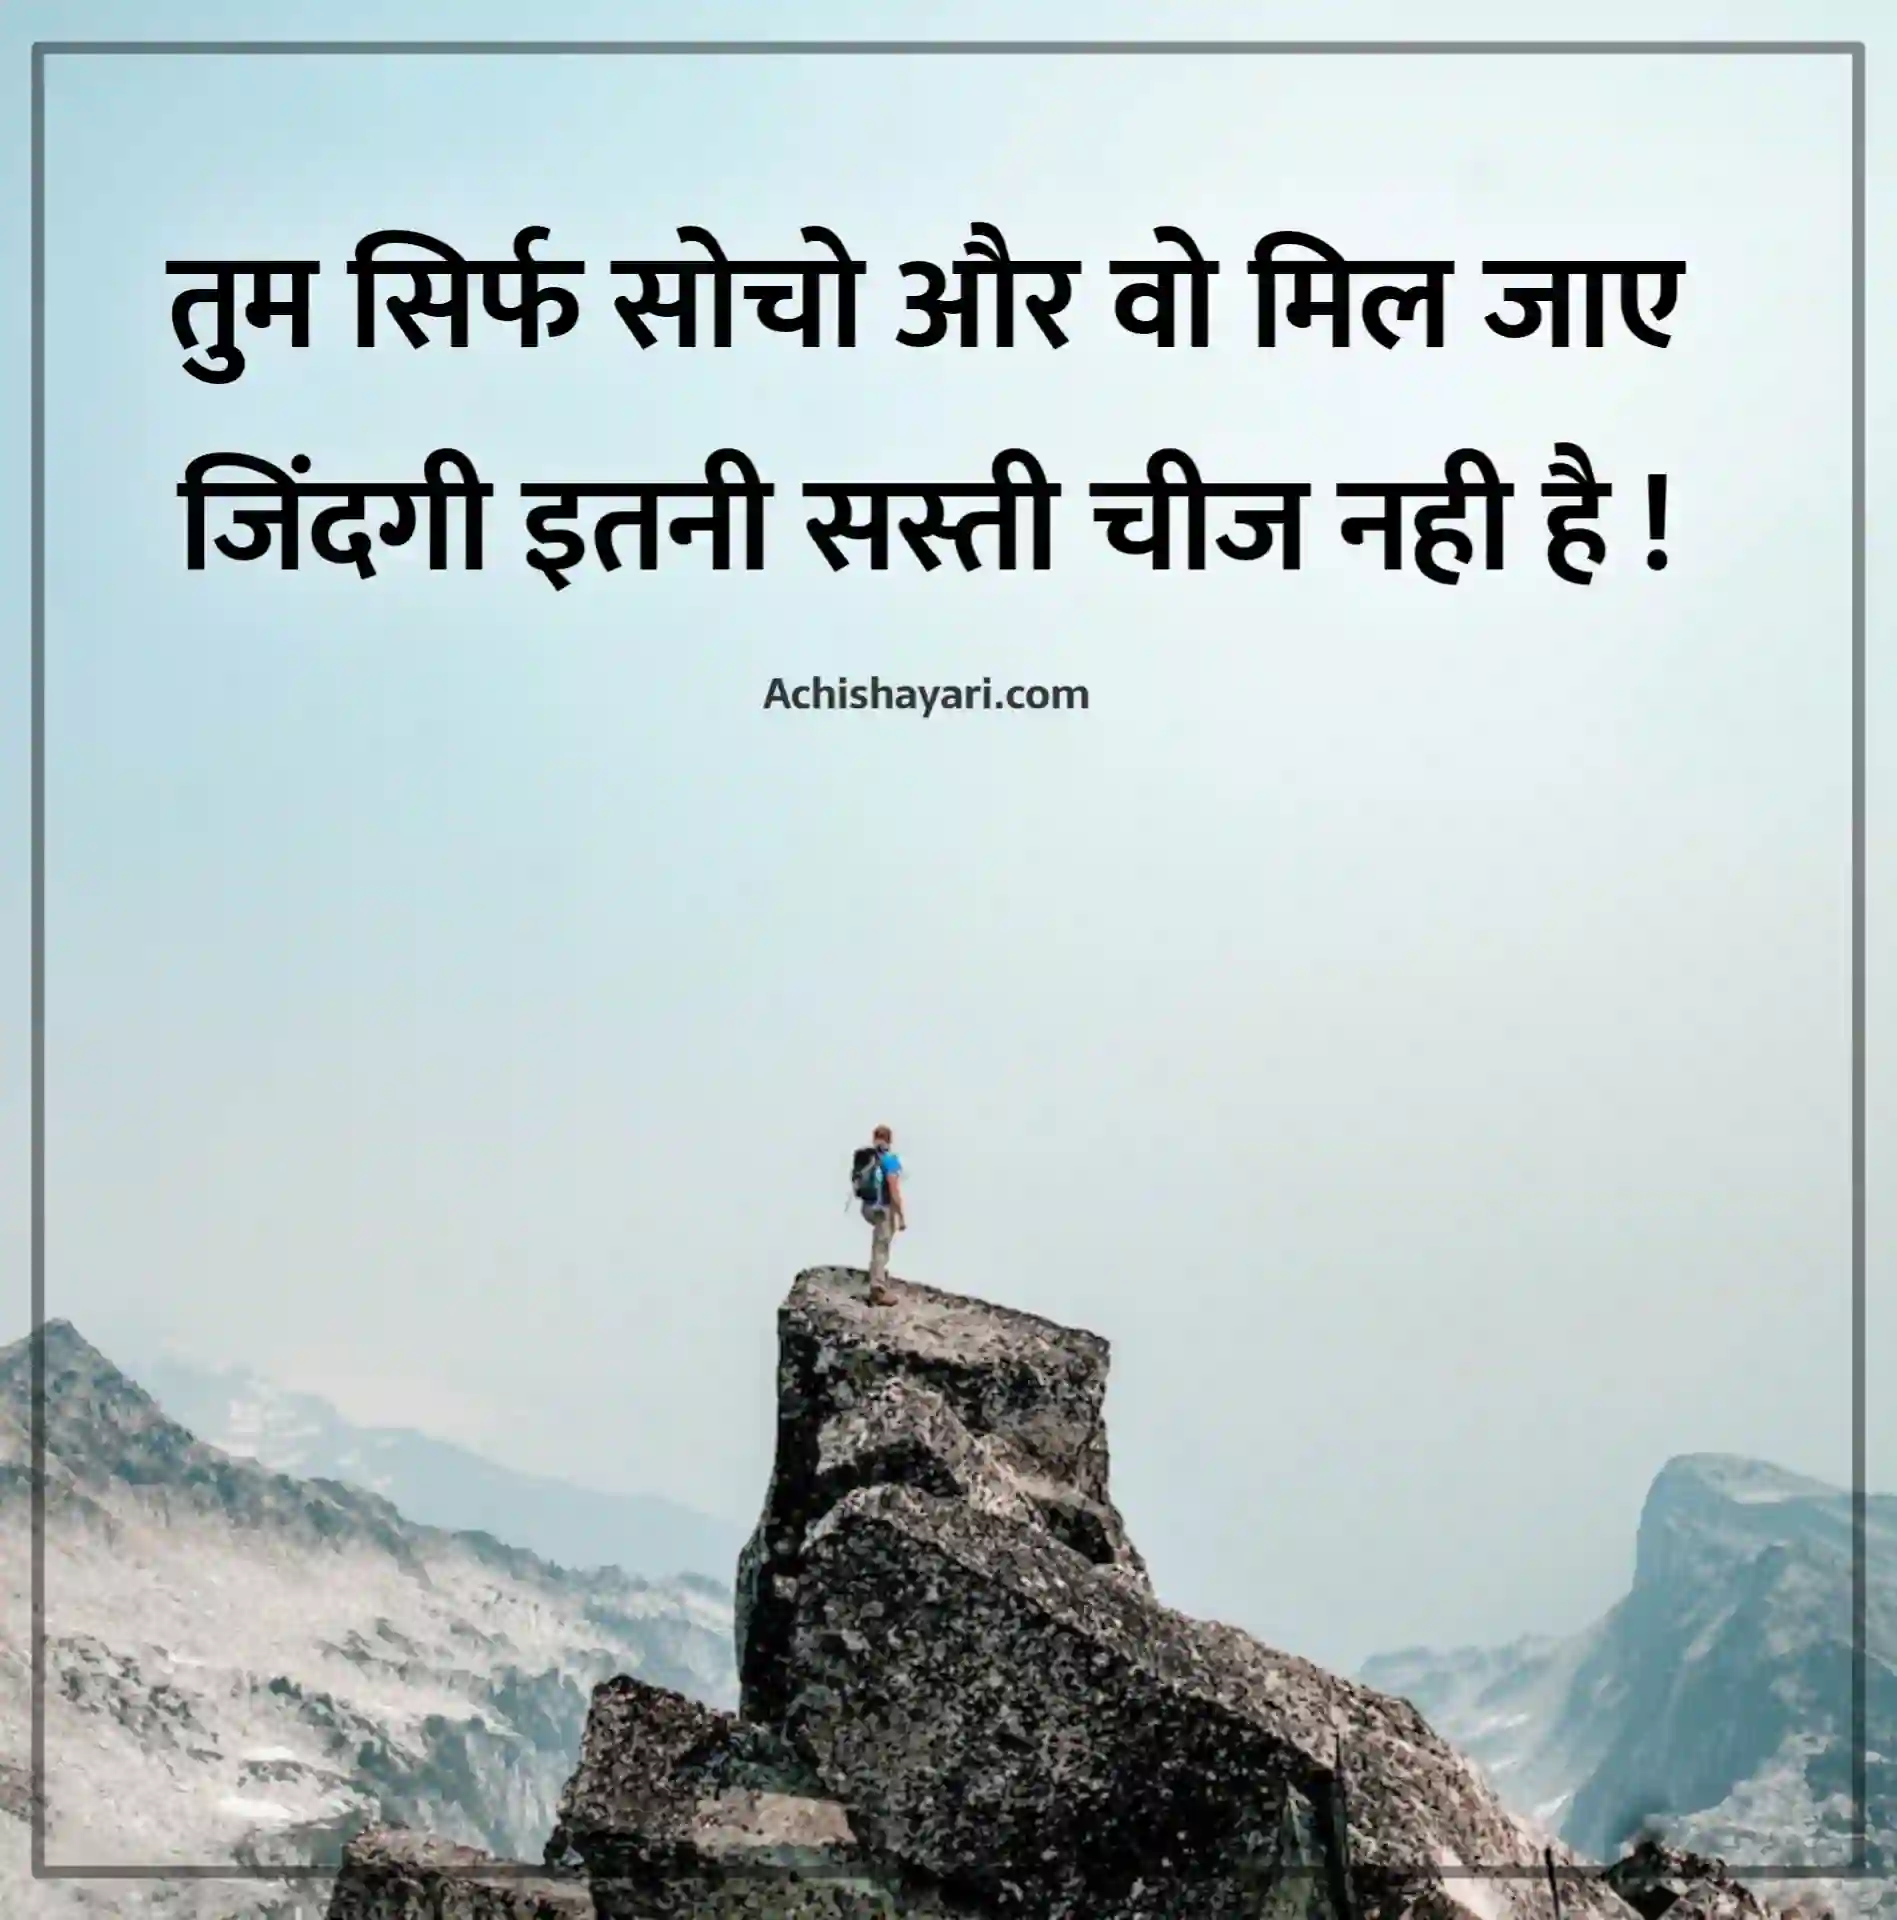 Life True Lines in Hindi